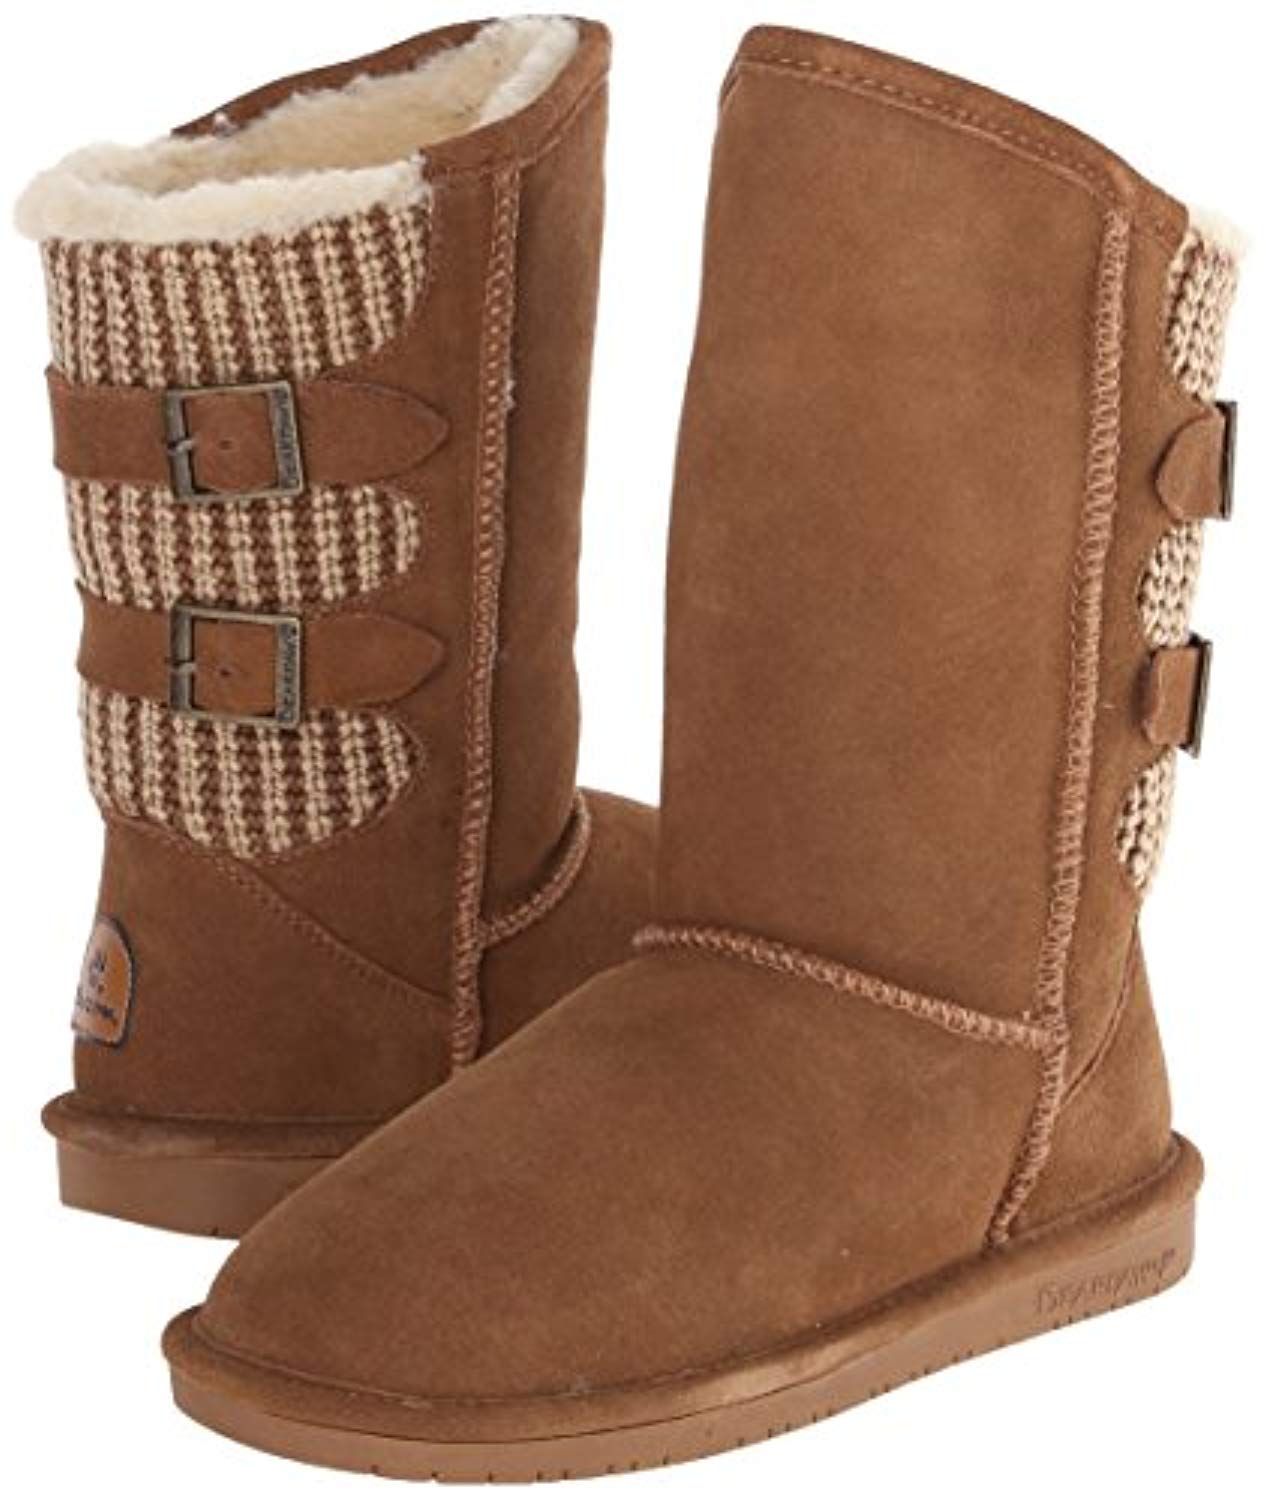 childrens bear paws boots